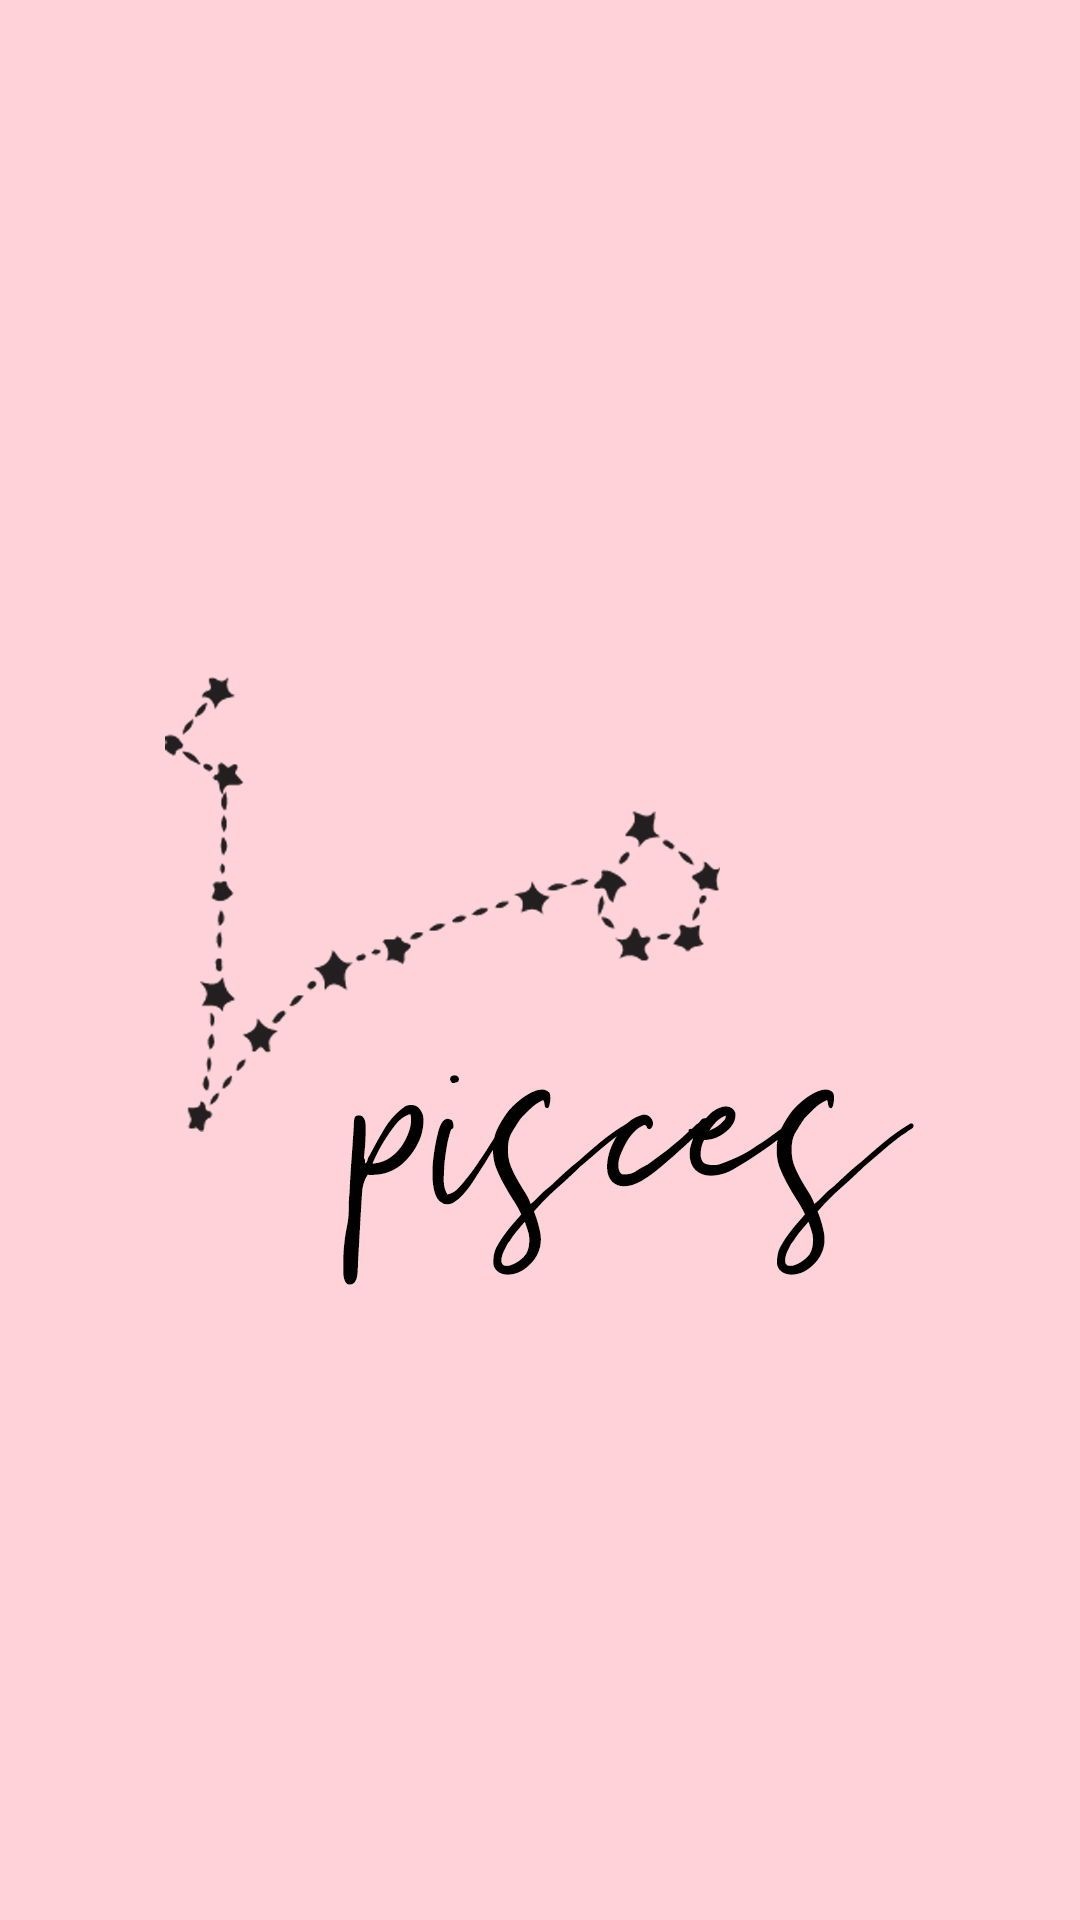 Pisces Zodiac Sign, Aesthetic iPhone wallpapers, Picture collage wall, Cute visuals, 1080x1920 Full HD Phone